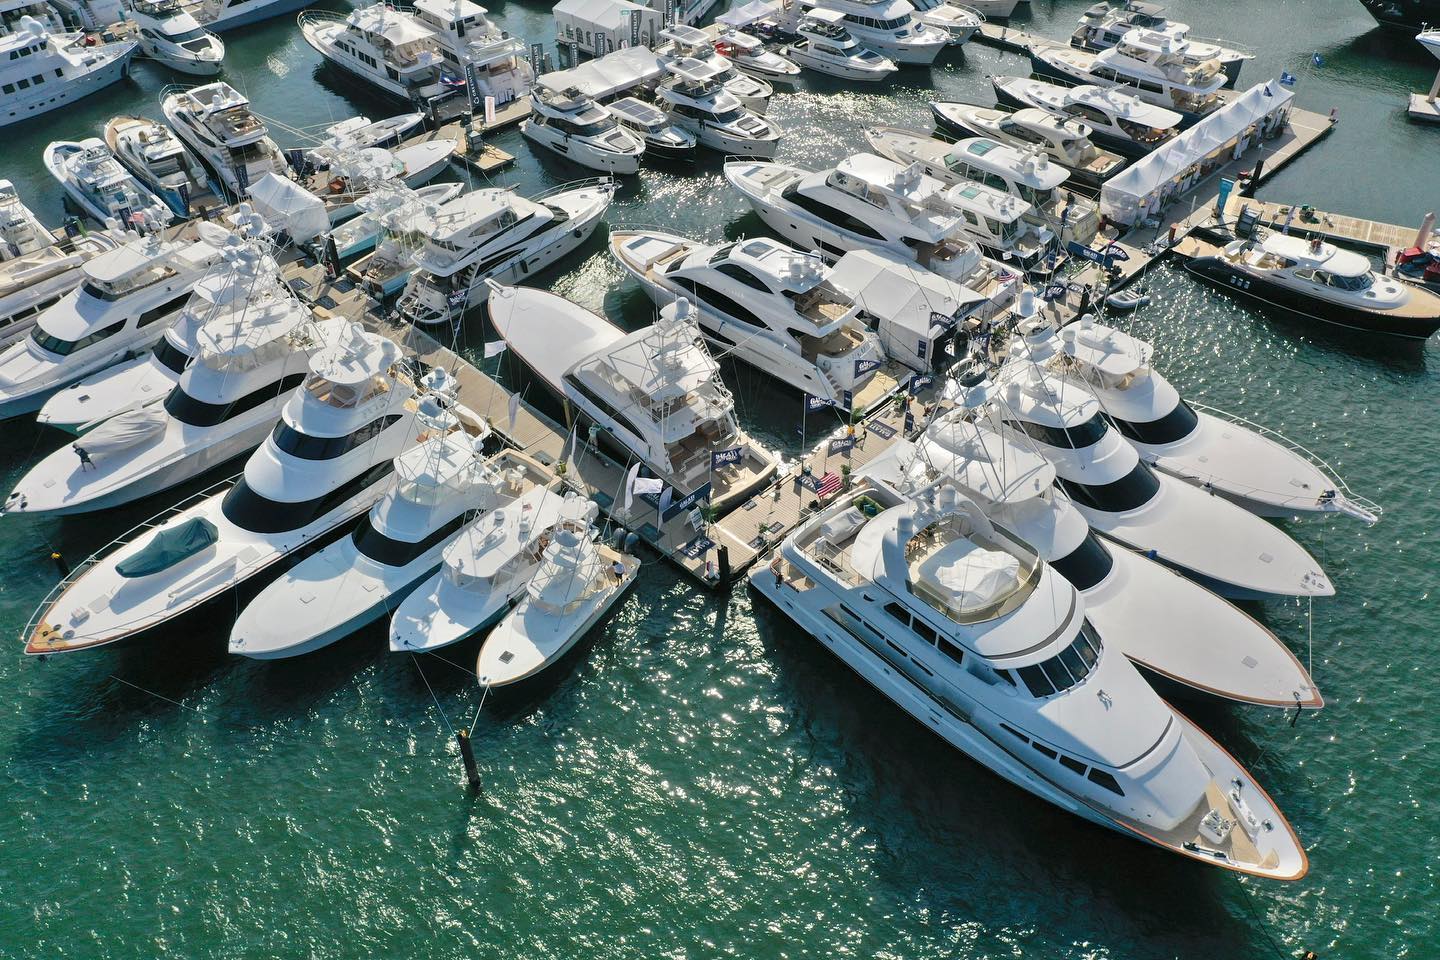 2022 Palm Beach International Boat Show- Top Boat Show in the Country